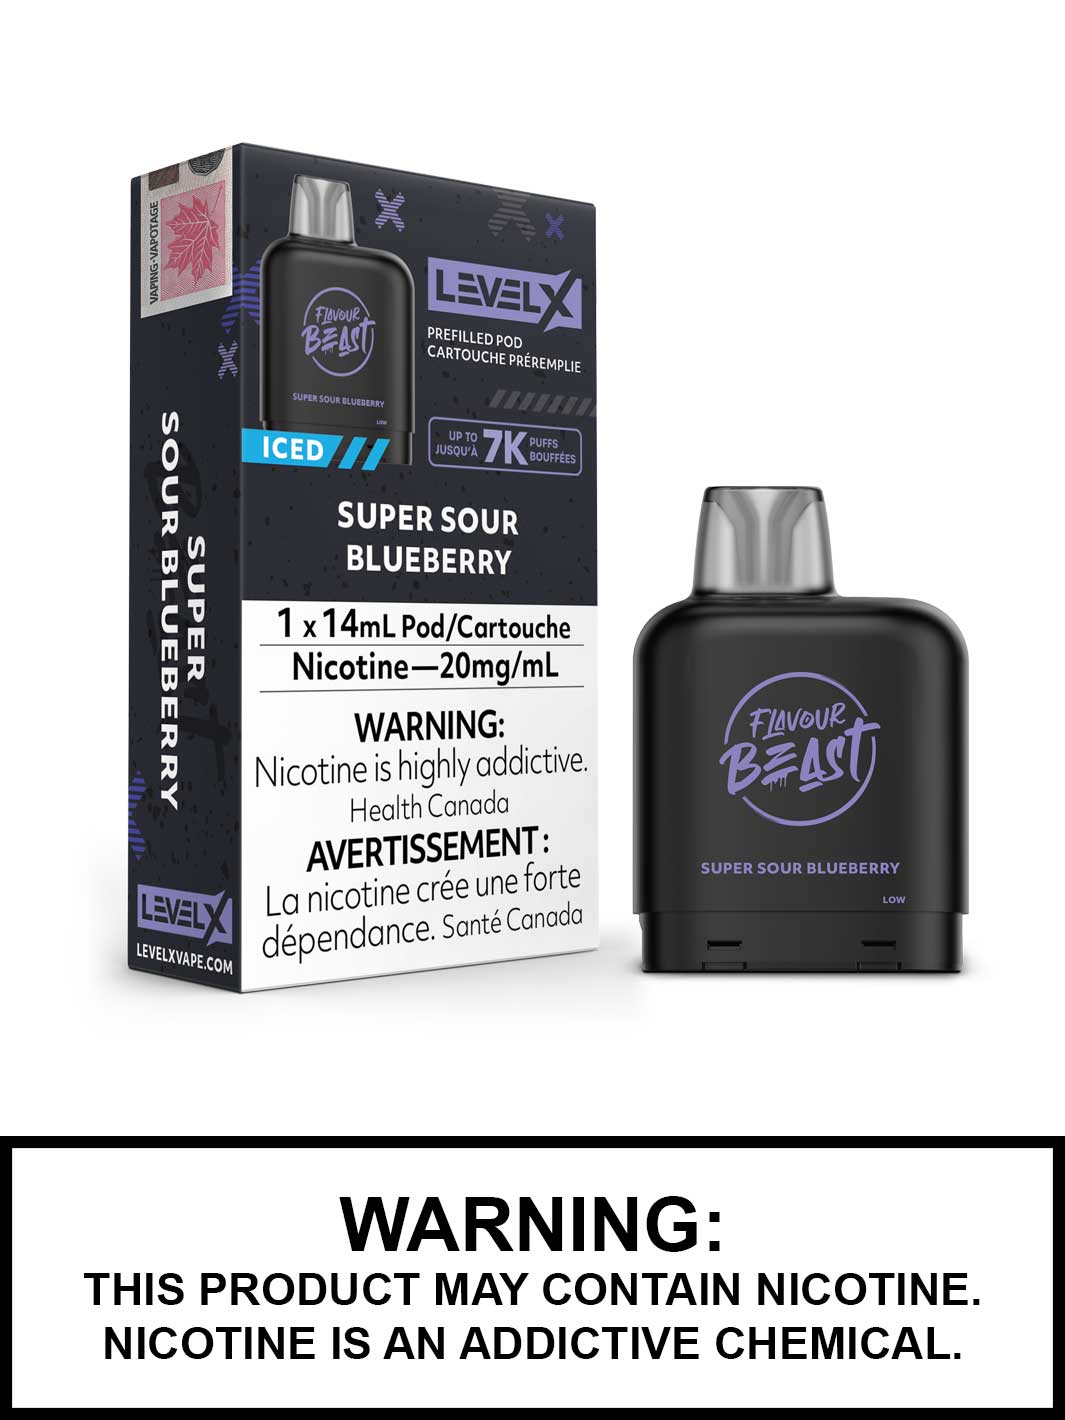 Super Sour Blueberry Iced Level X Flavour Beast Pods, Vape360 Canada